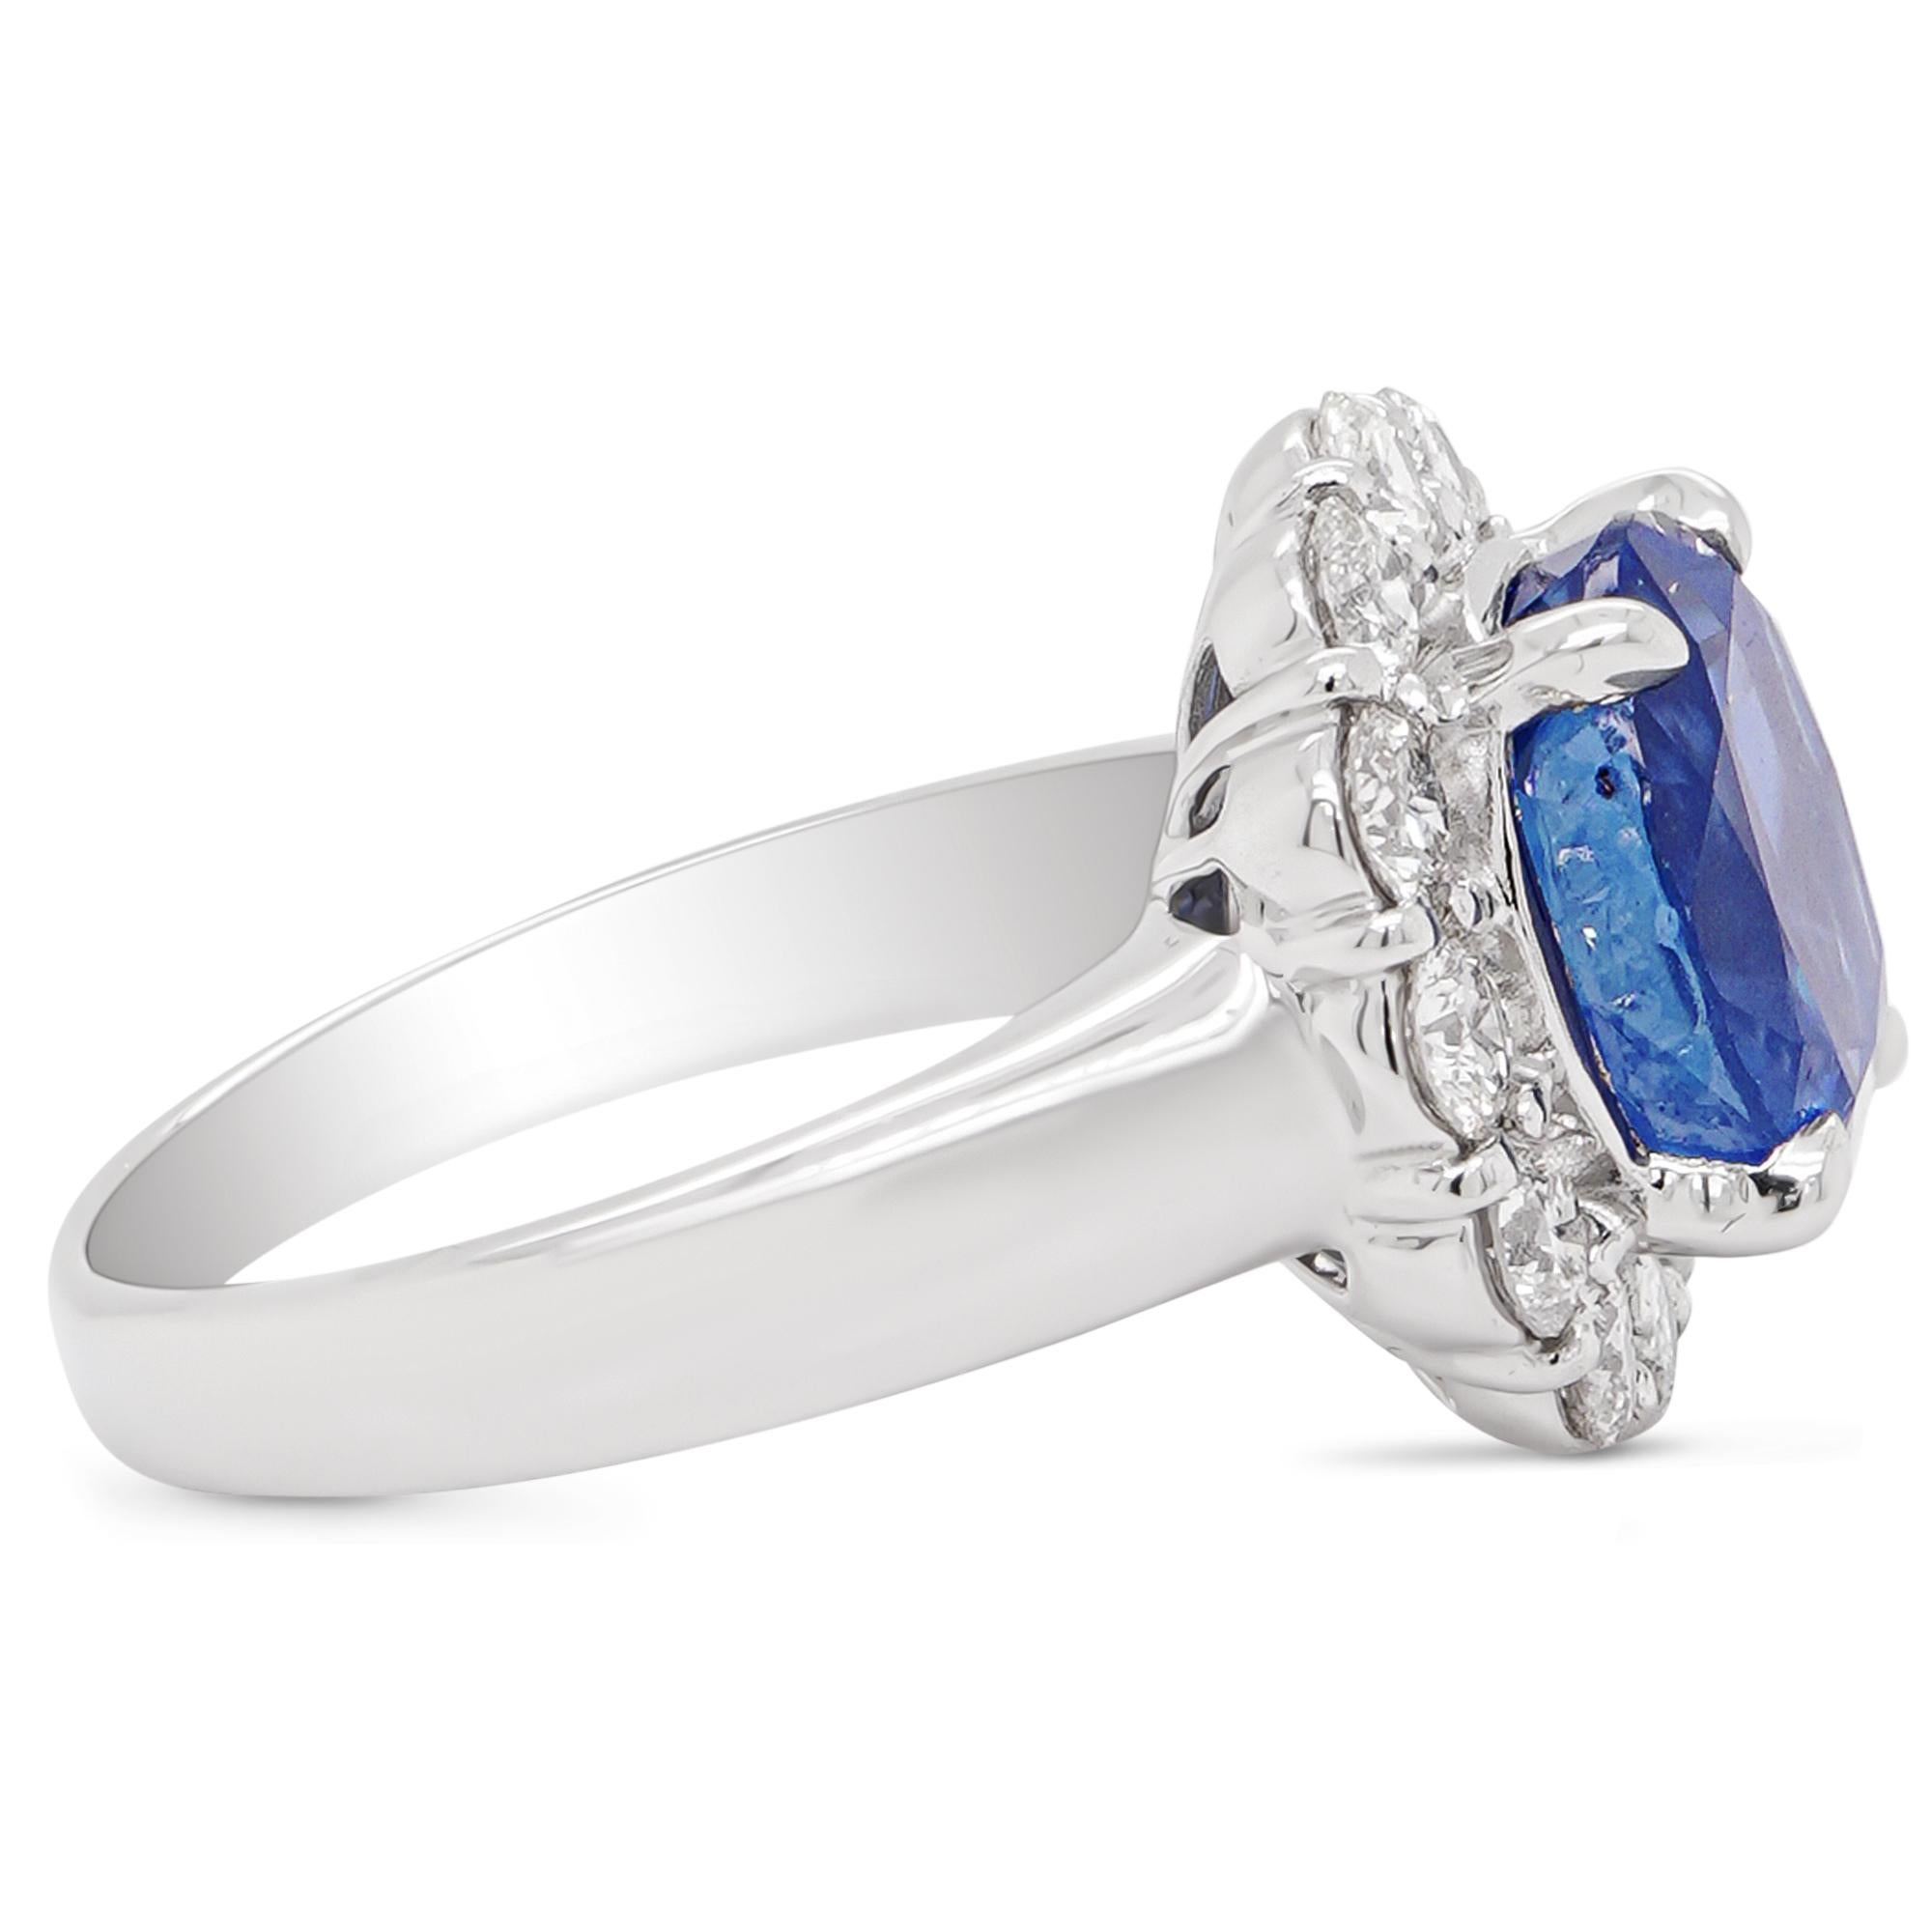 A stunning 5 carat GIA Certified Burma No heat blue sapphire is set with 1.05 carats of white round brilliant diamond.
Burmese sapphires are among the most coveted colored gemstones in the world. The historical importance of this source and the fine